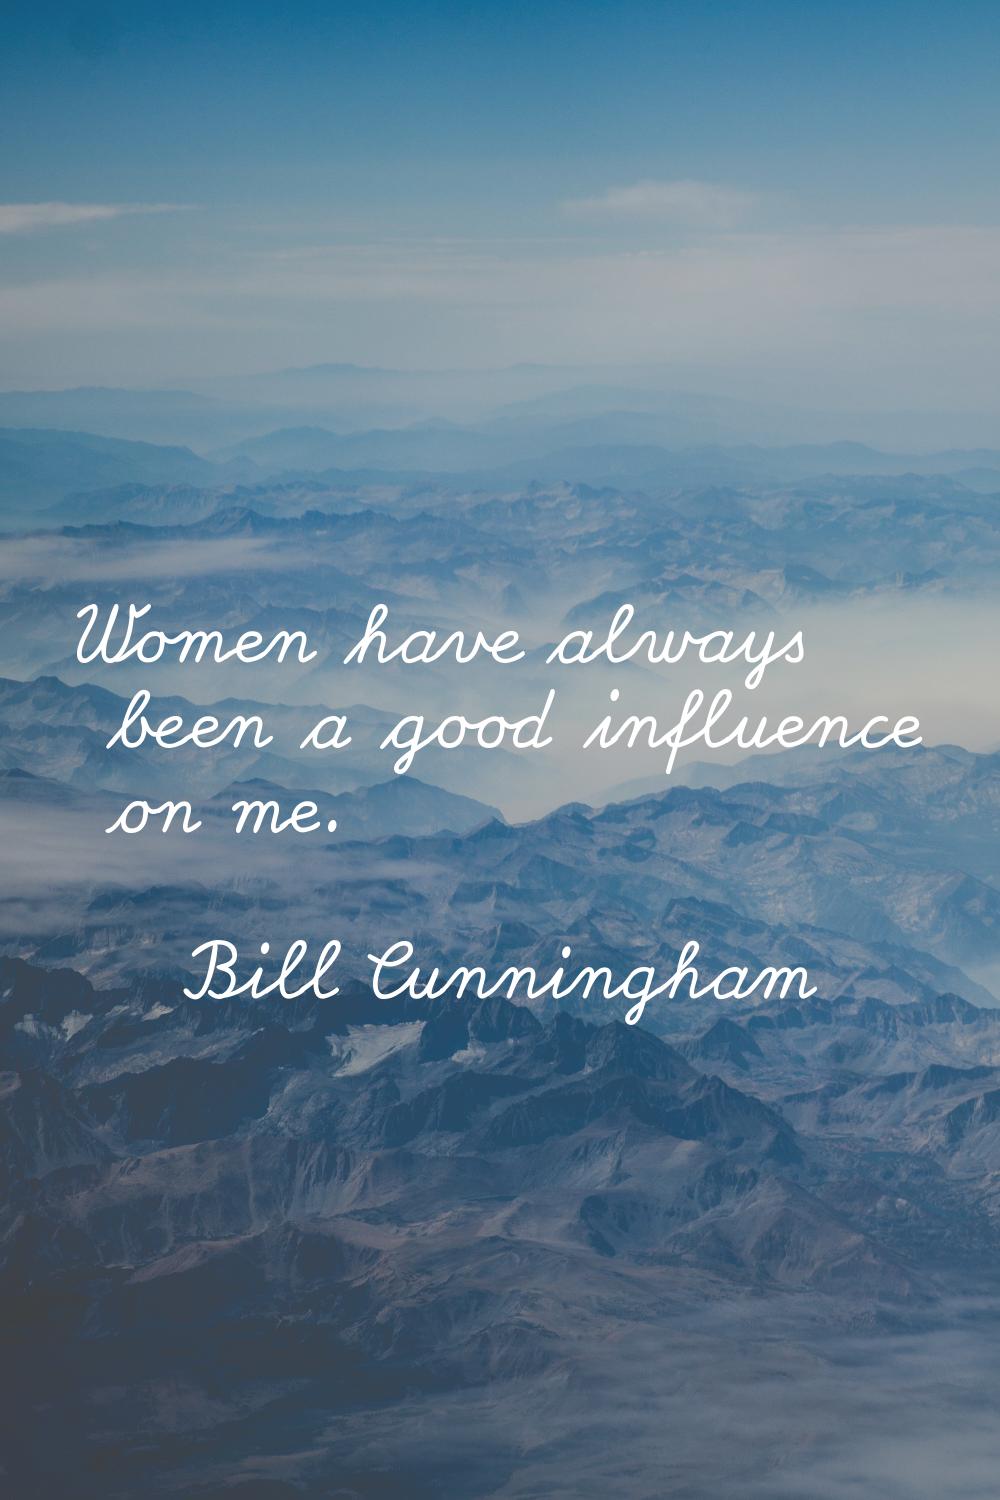 Women have always been a good influence on me.